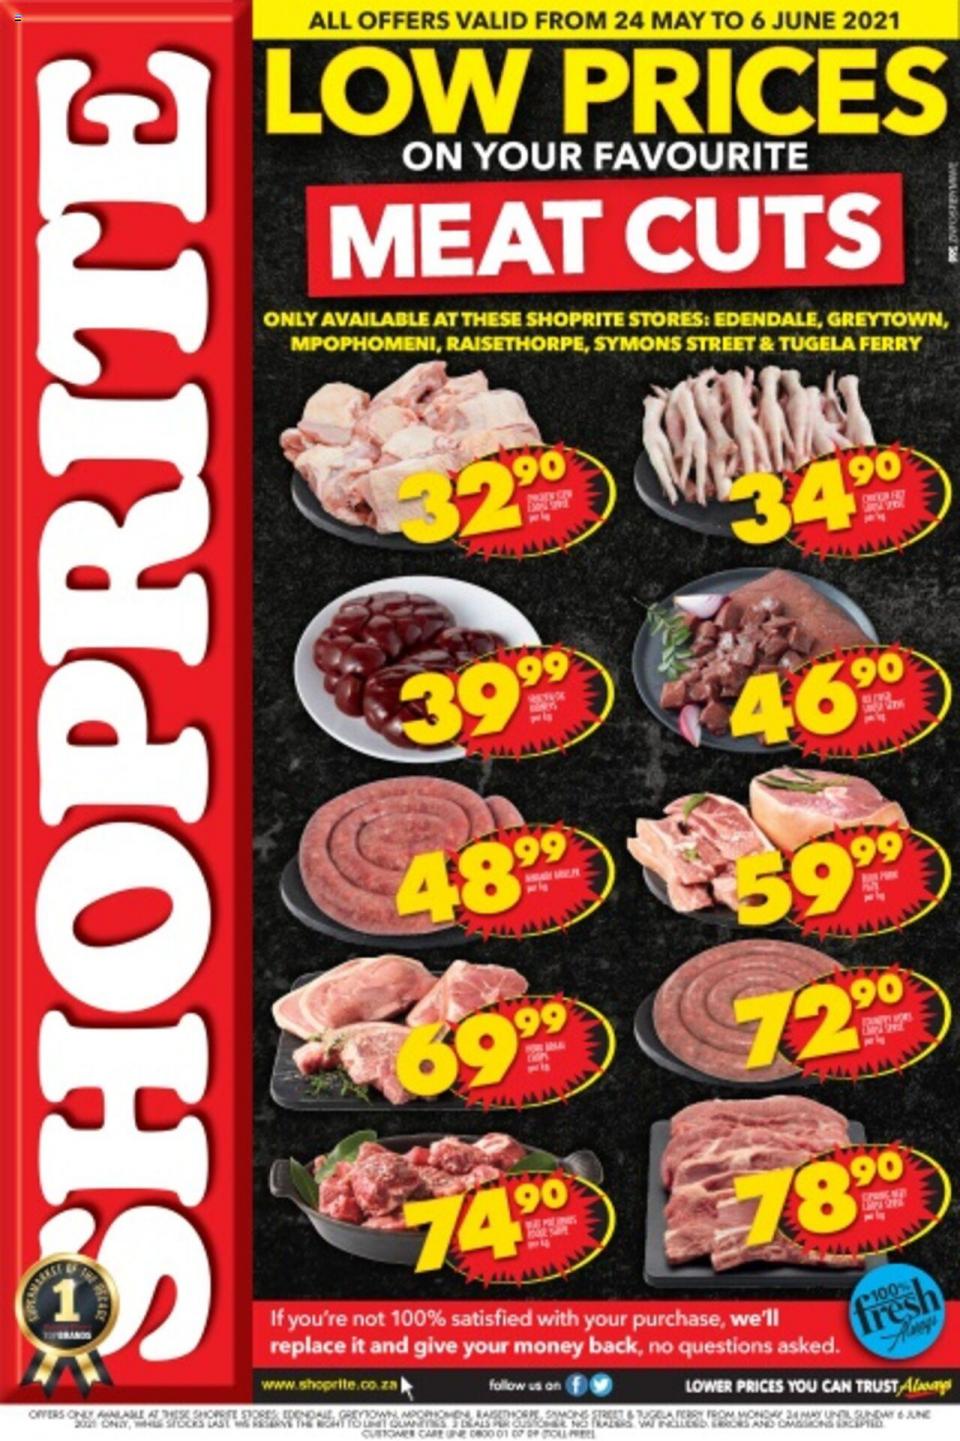 Shoprite Specials Low Prices On Meat Cuts 24 May – 6 Jun 2021